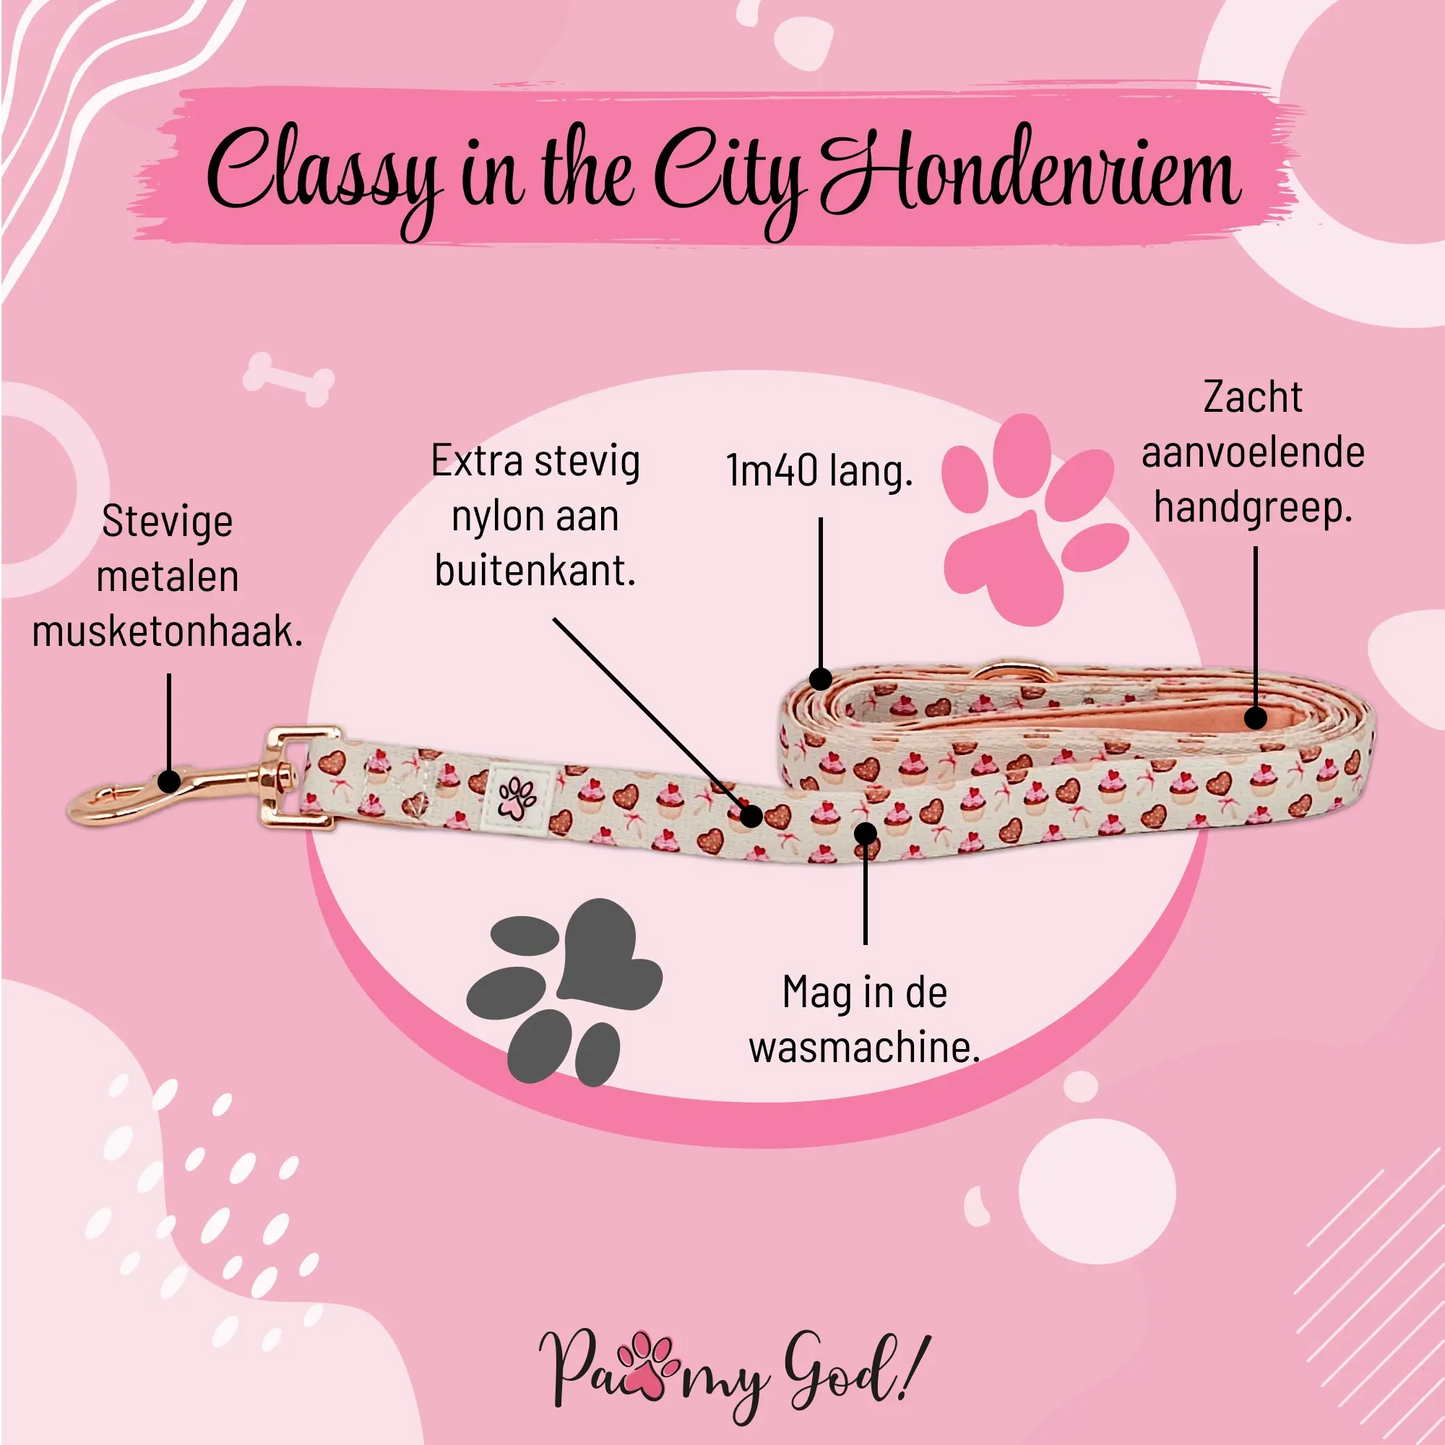 Classy in the City Cloth Leash Features